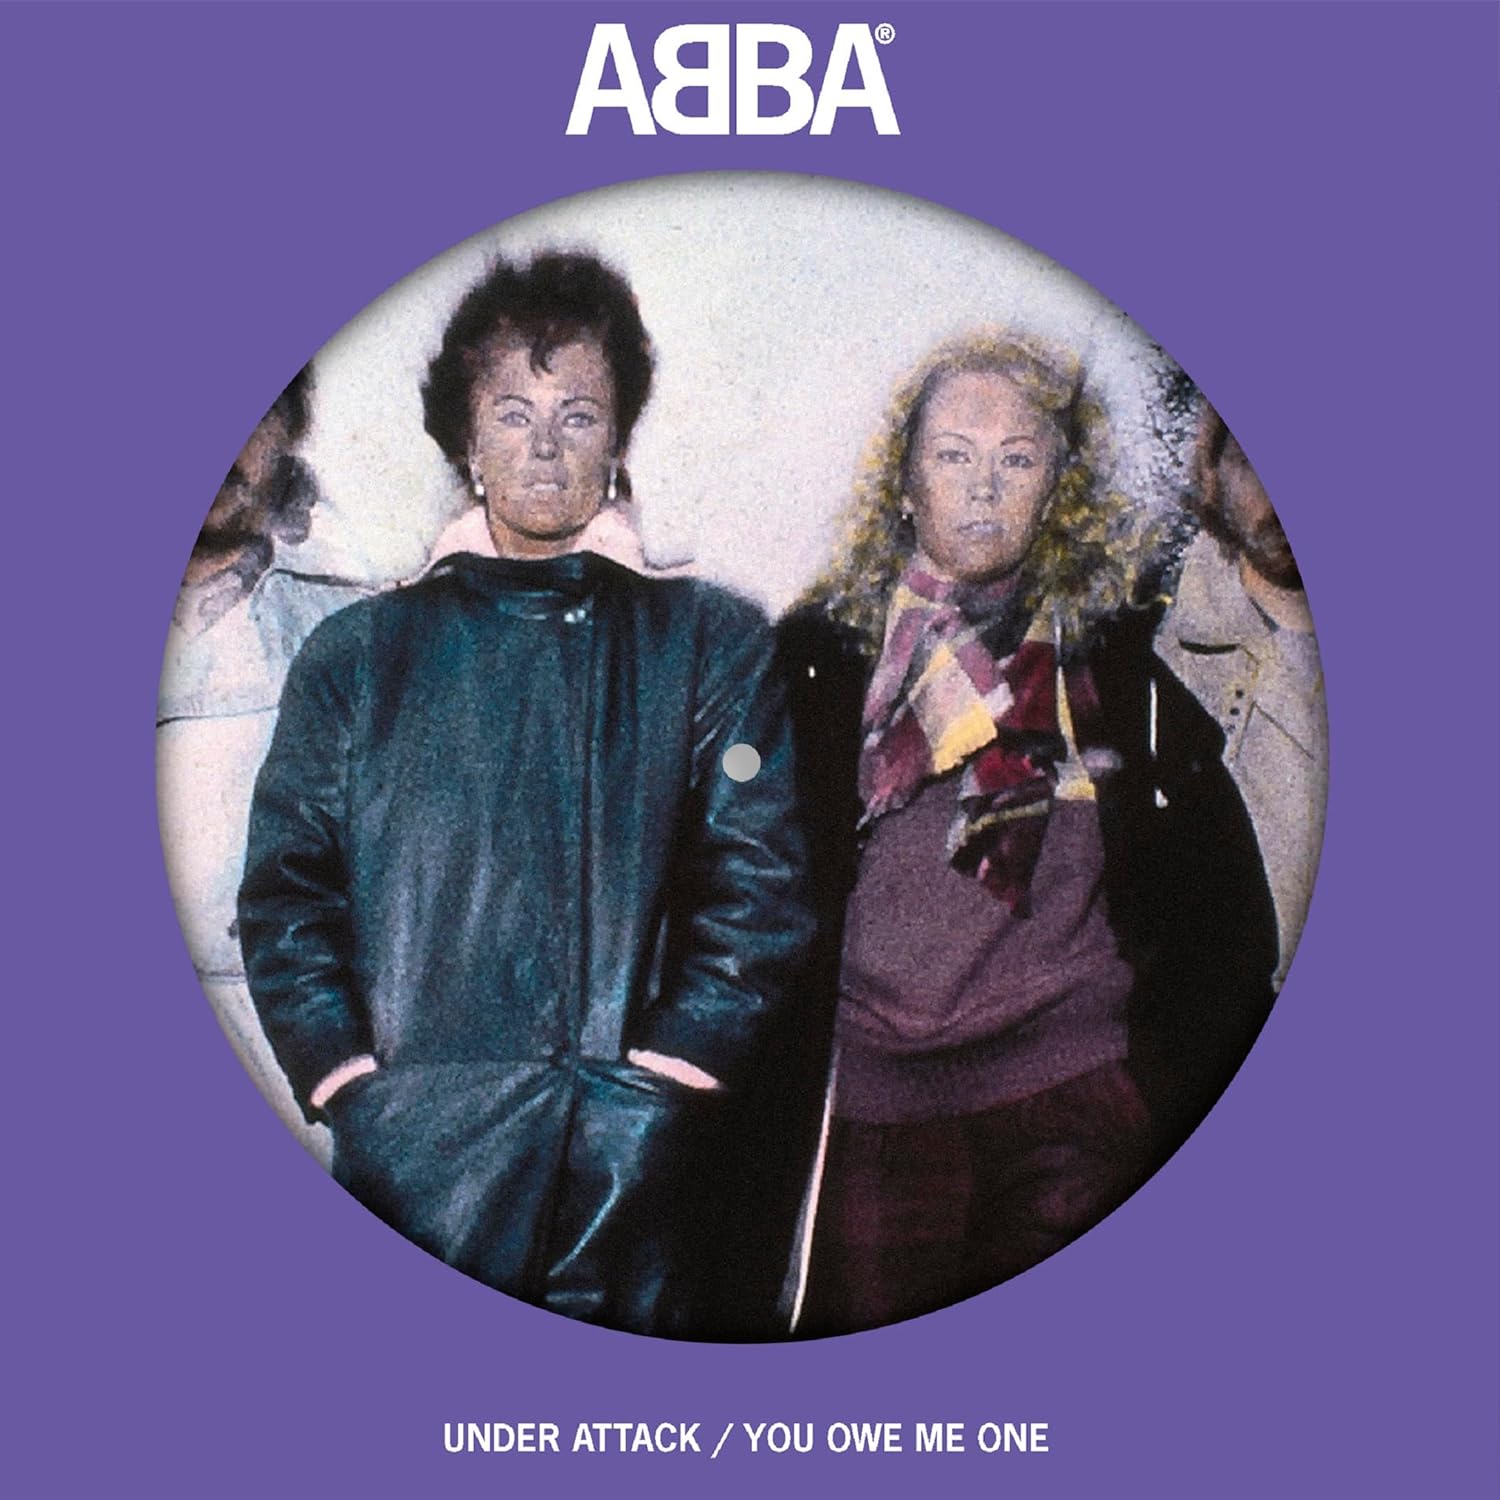 Under Attack / You Owe Me One (Picture Vinyl, 7" 45RPM) | ABBA